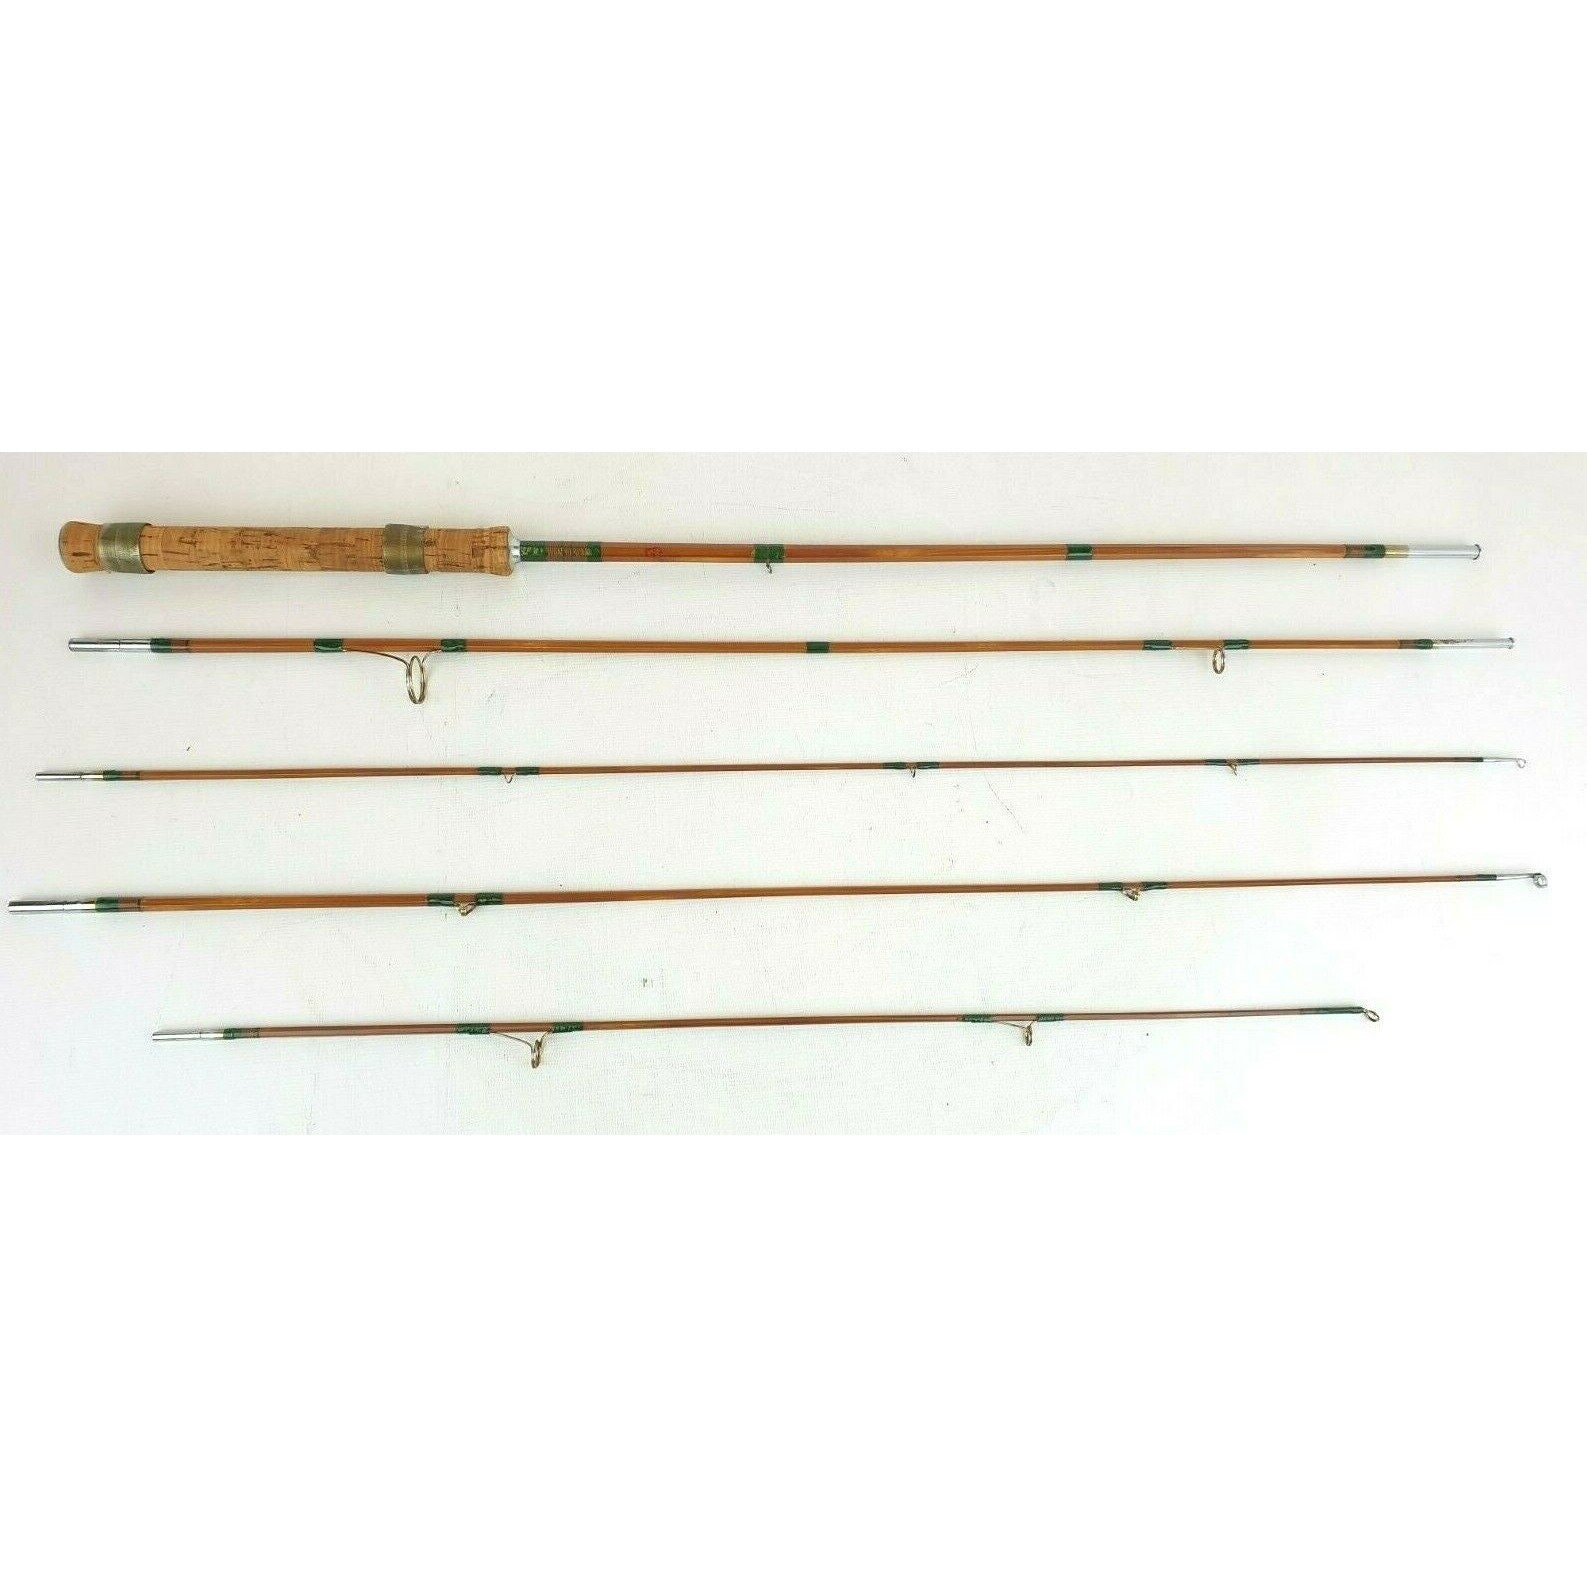 5 Piece Emperor Japan Bamboo 8ft Fishing Rod Pole Fly Fishing Outdoors  Vintage